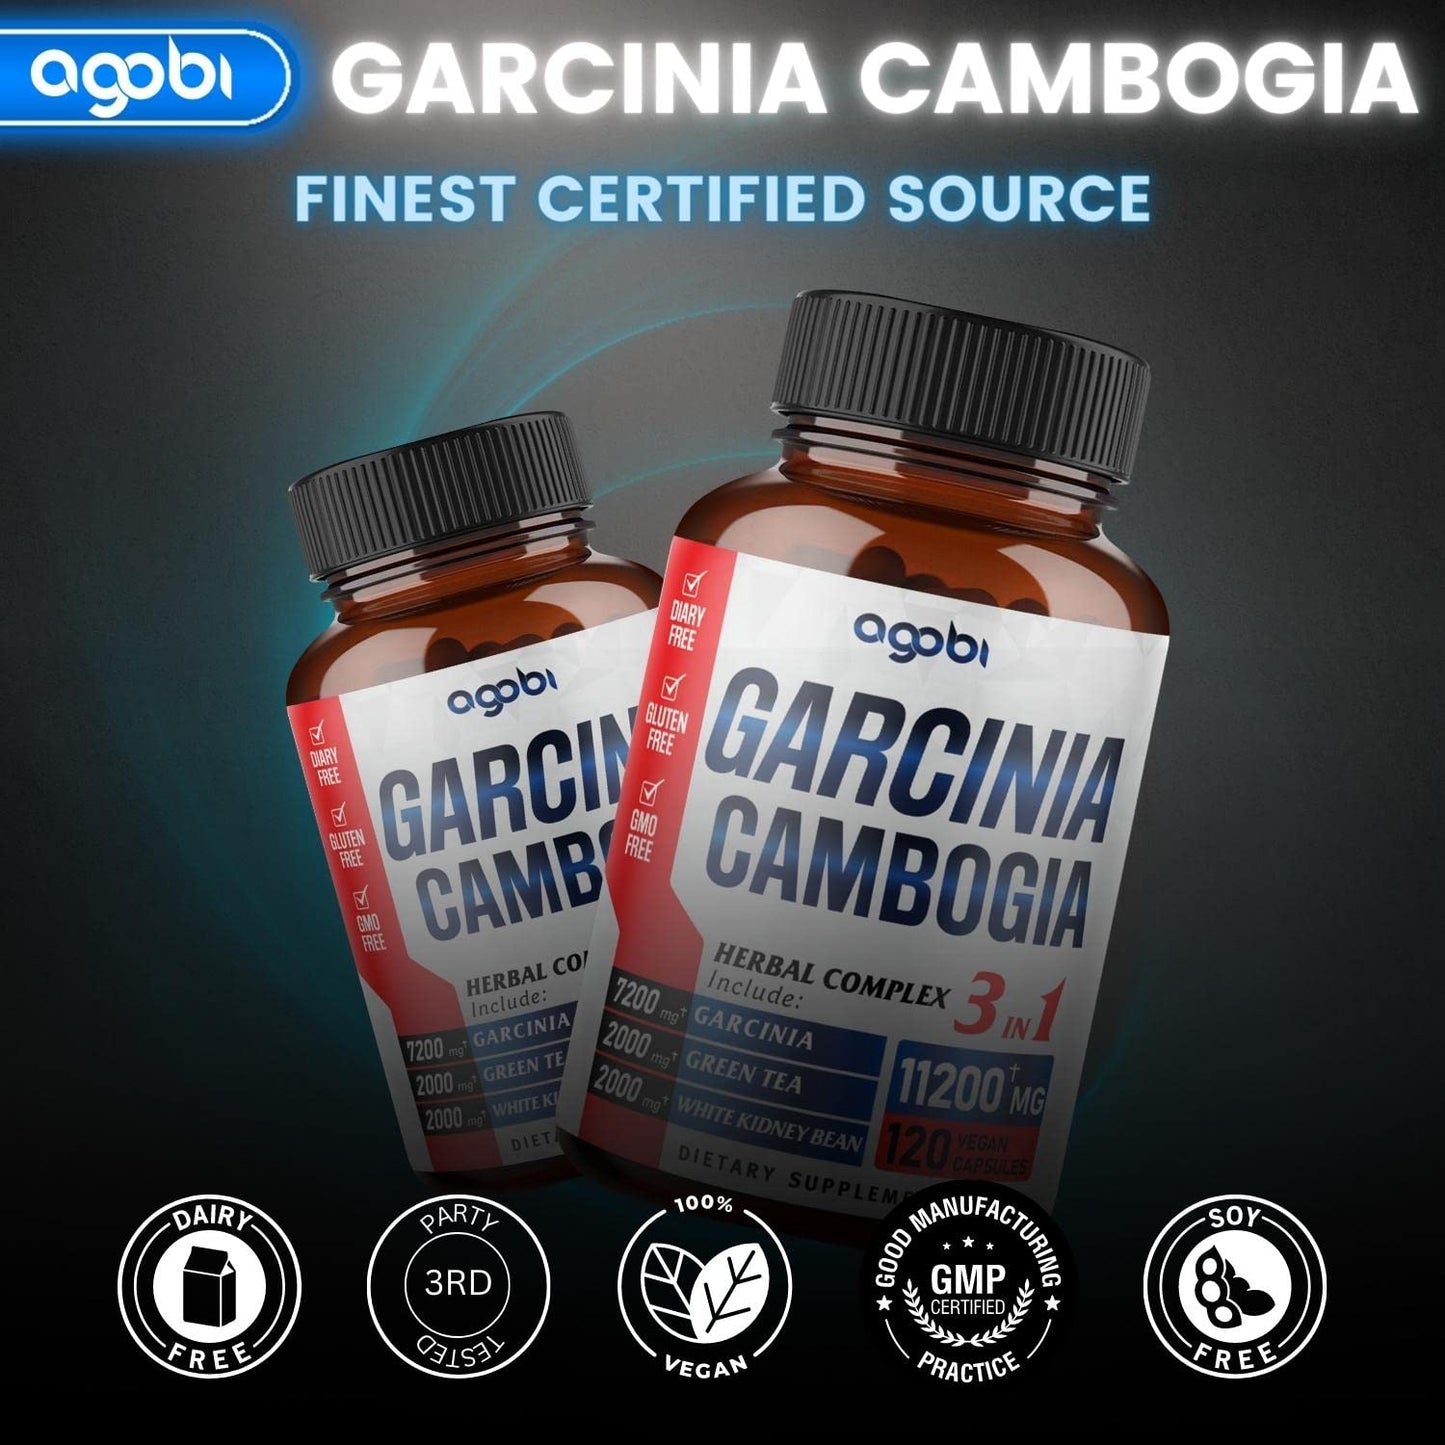 agobi 3in1 Garcinia Cambogia Extract Capsules - 11200mg Herbal Supplement for Body Health